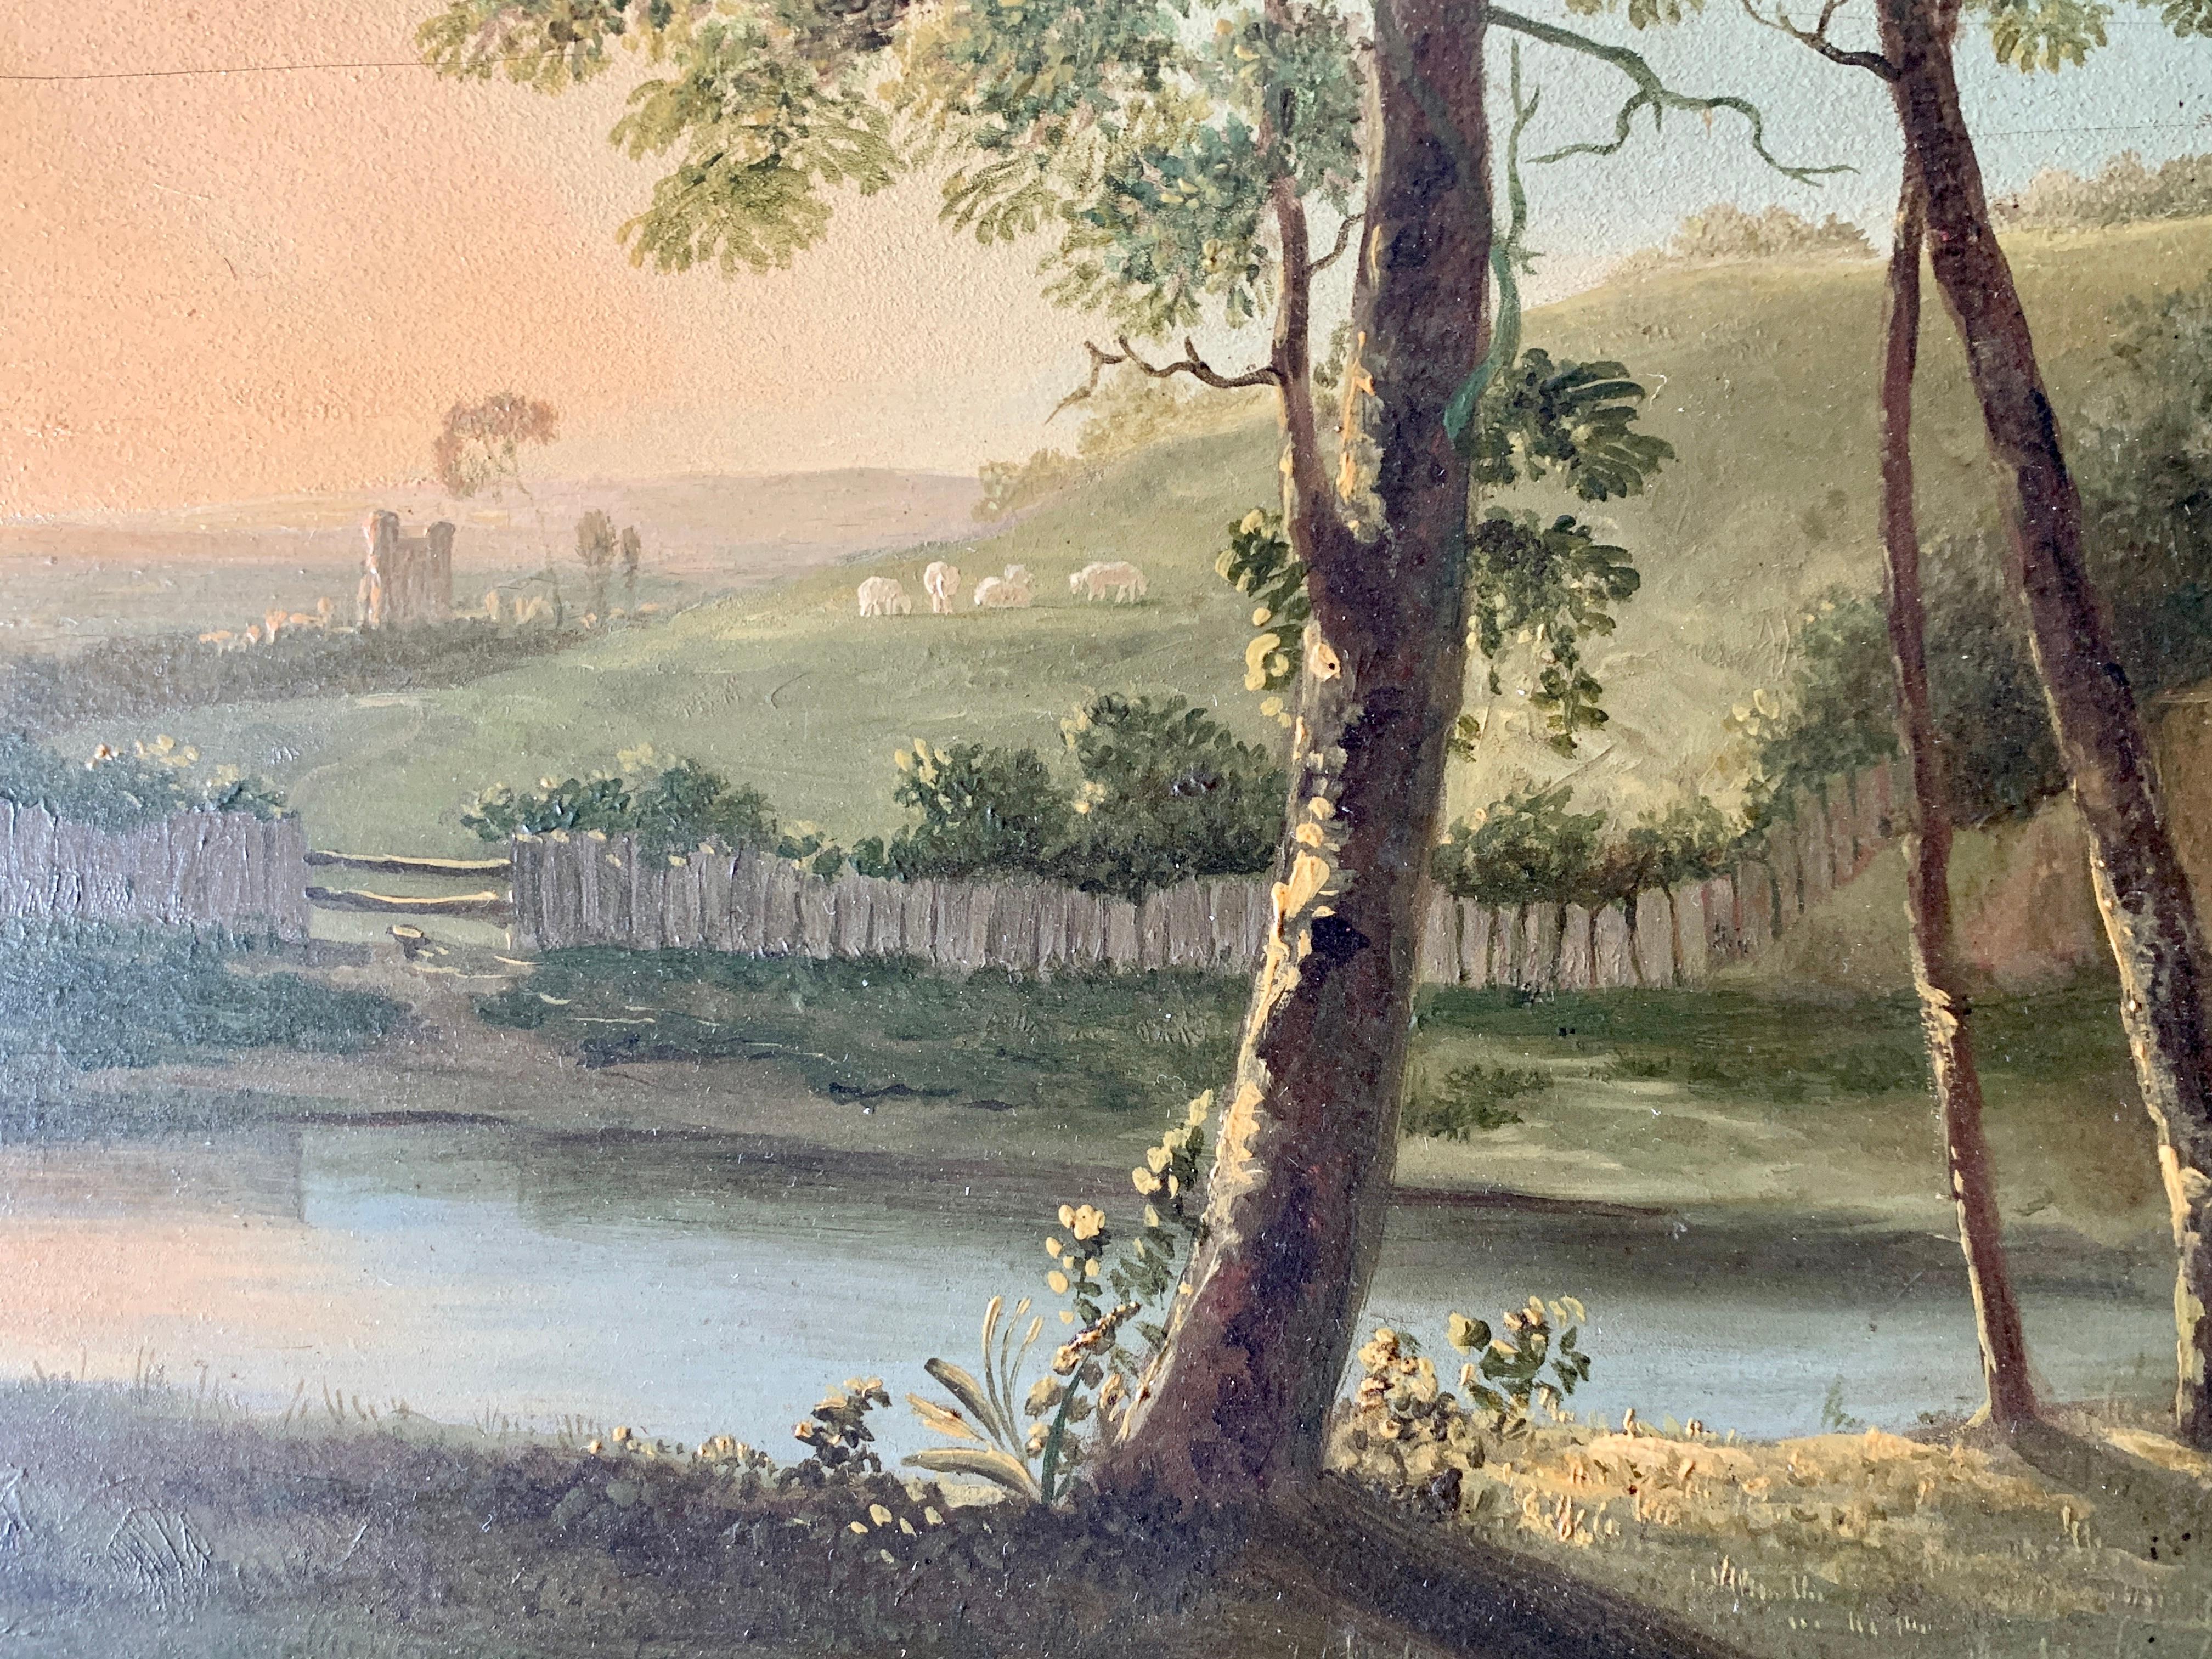 19th century English landscape with a cottage, pond, trees at sunrise or sunset - Brown Landscape Painting by Unknown